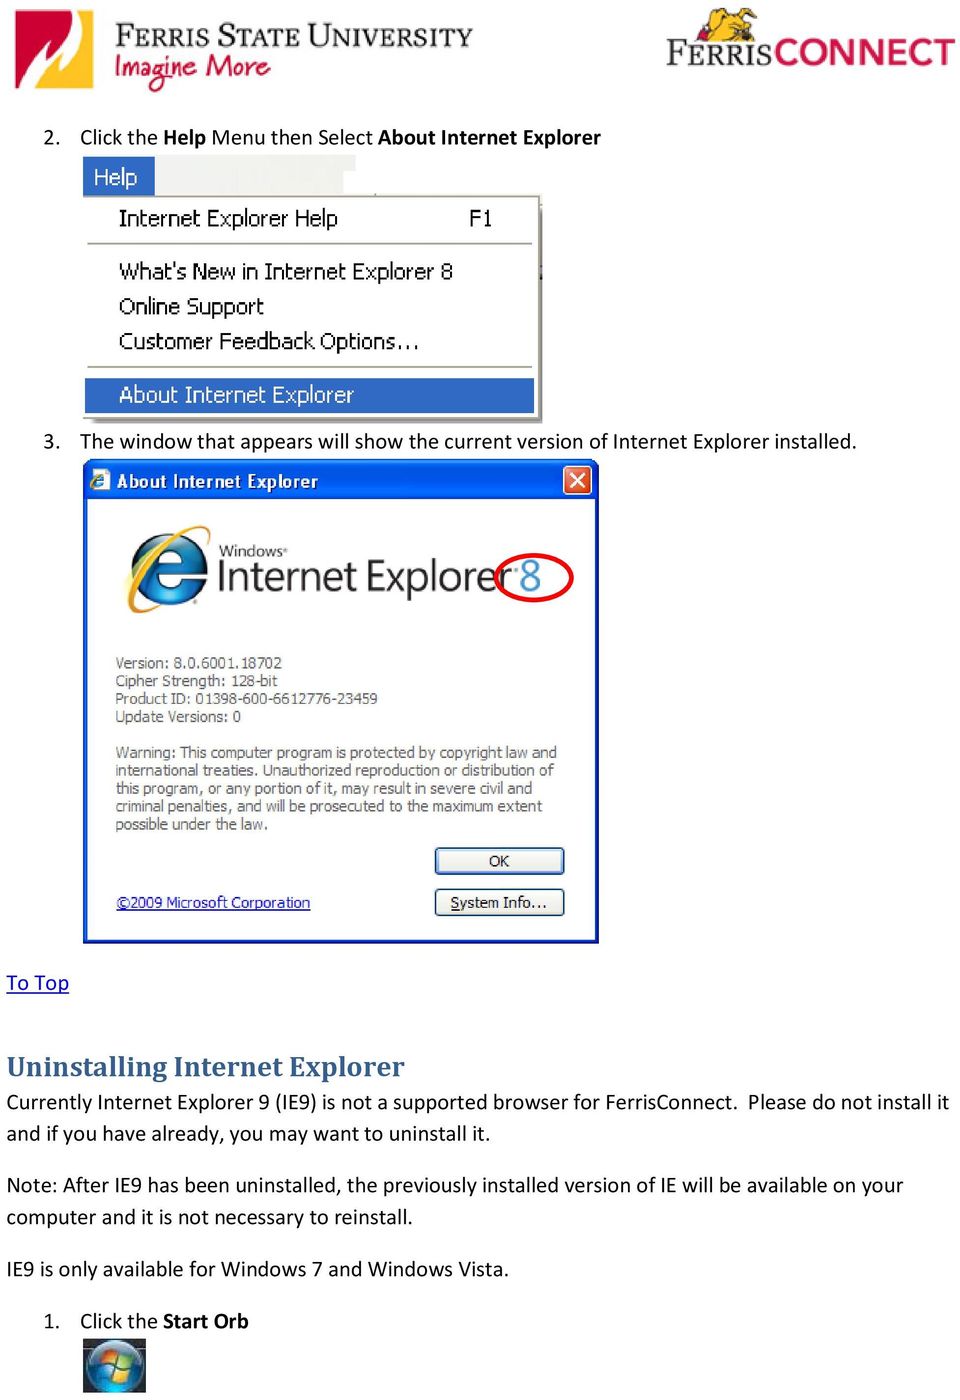 Uninstalling Internet Explorer Currently Internet Explorer 9 (IE9) is not a supported browser for FerrisConnect.